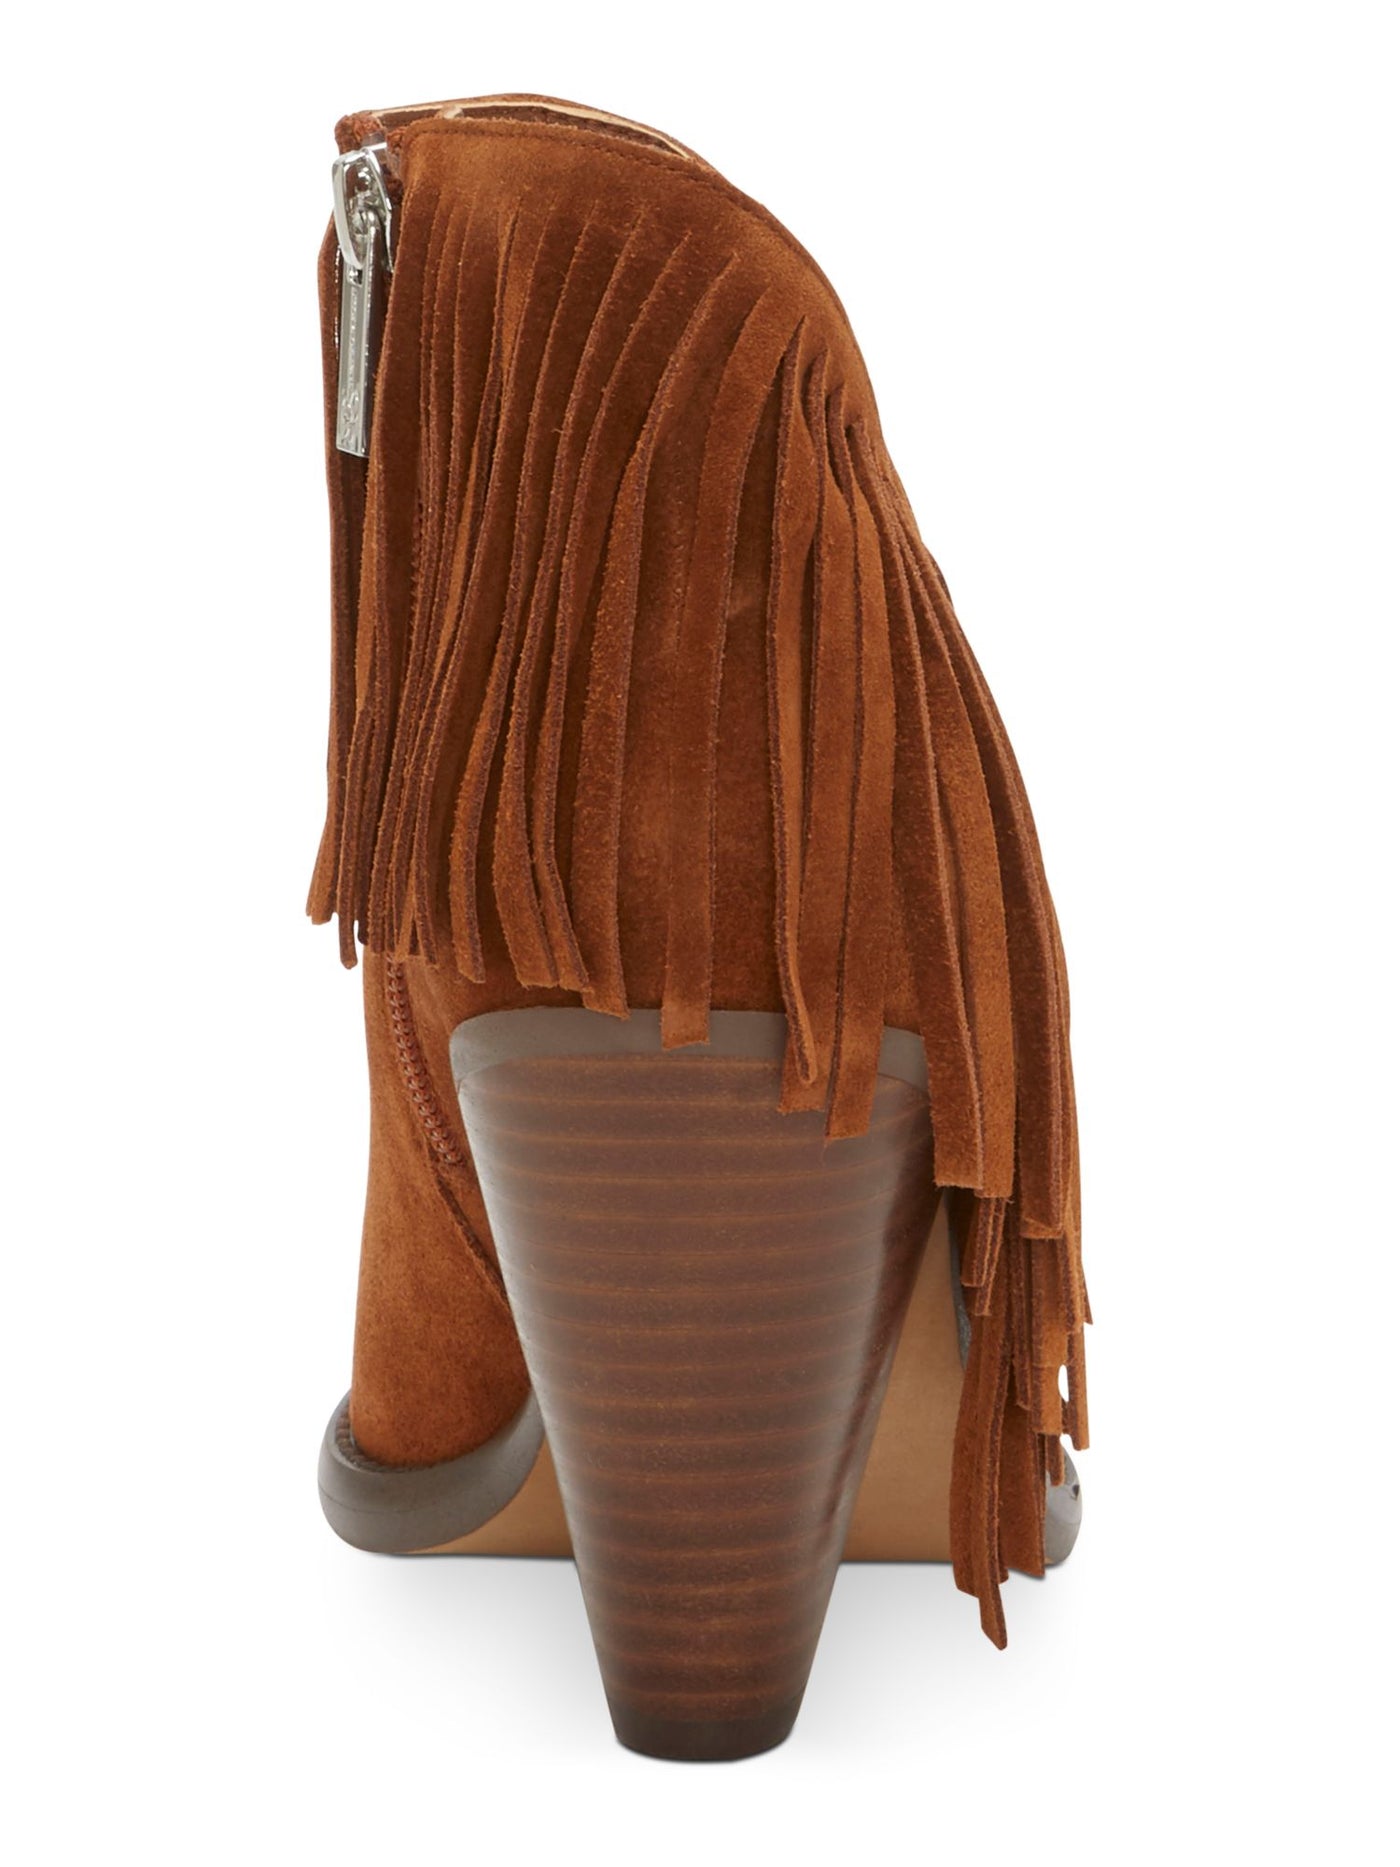 JESSICA SIMPSON Womens Brown Comfort Fringed Jewles Pointed Toe Cone Heel Zip-Up Leather Booties 11 M